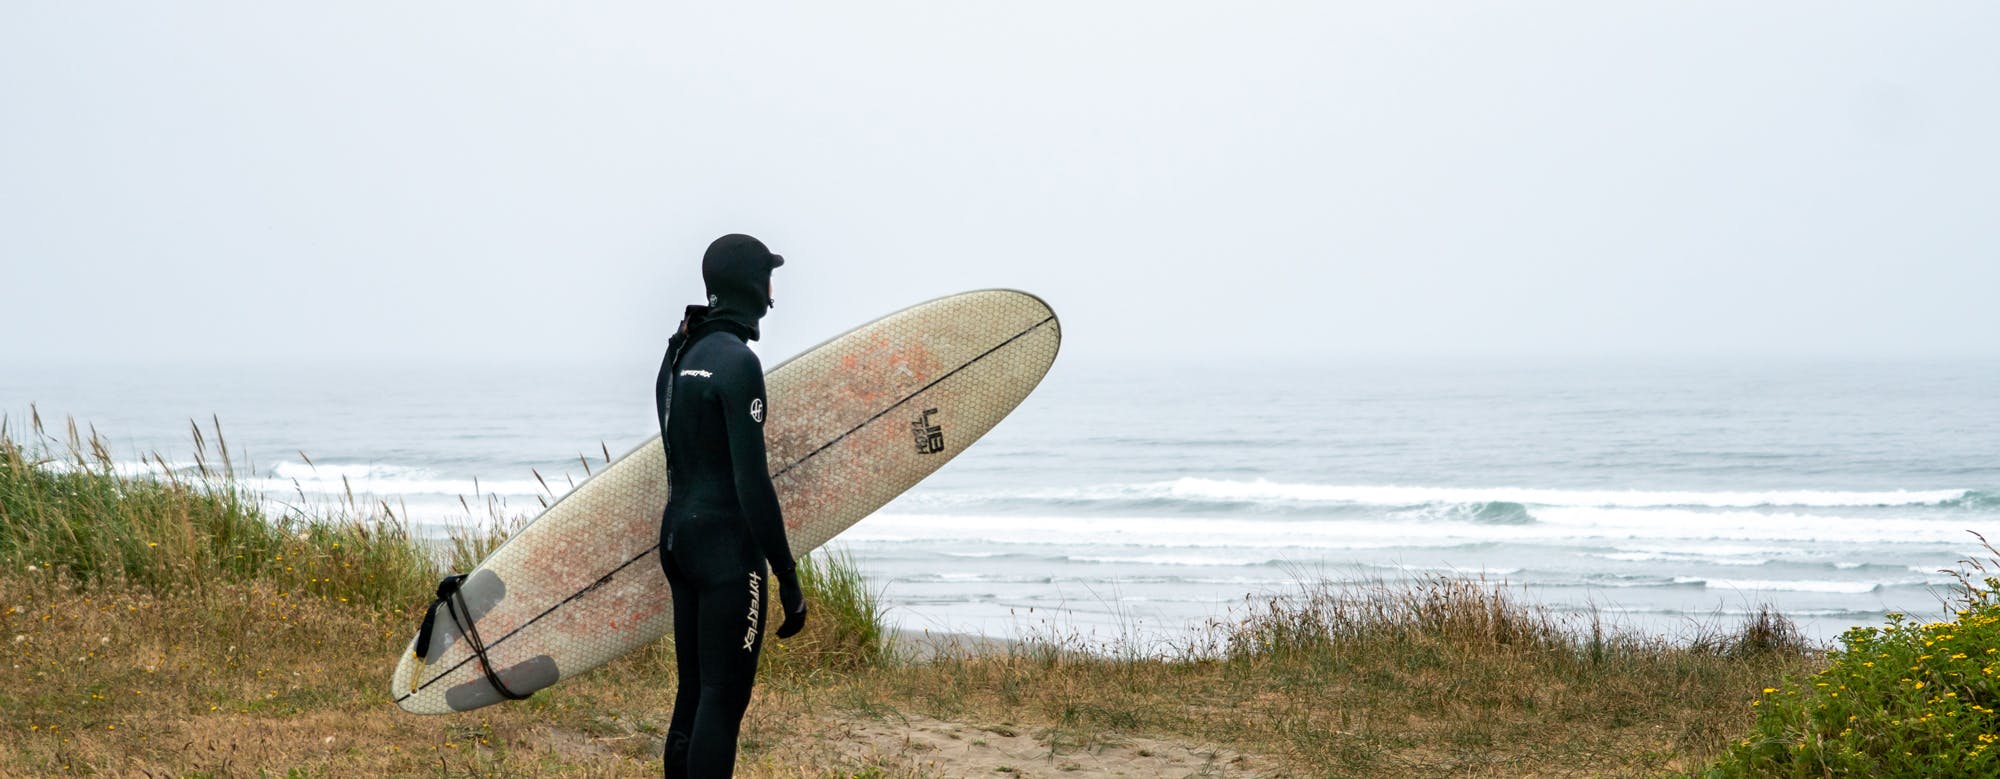 Repurposed to Ride: LOGE’s Westport Basecamp is an Apt Outpost for Surfing in Washington